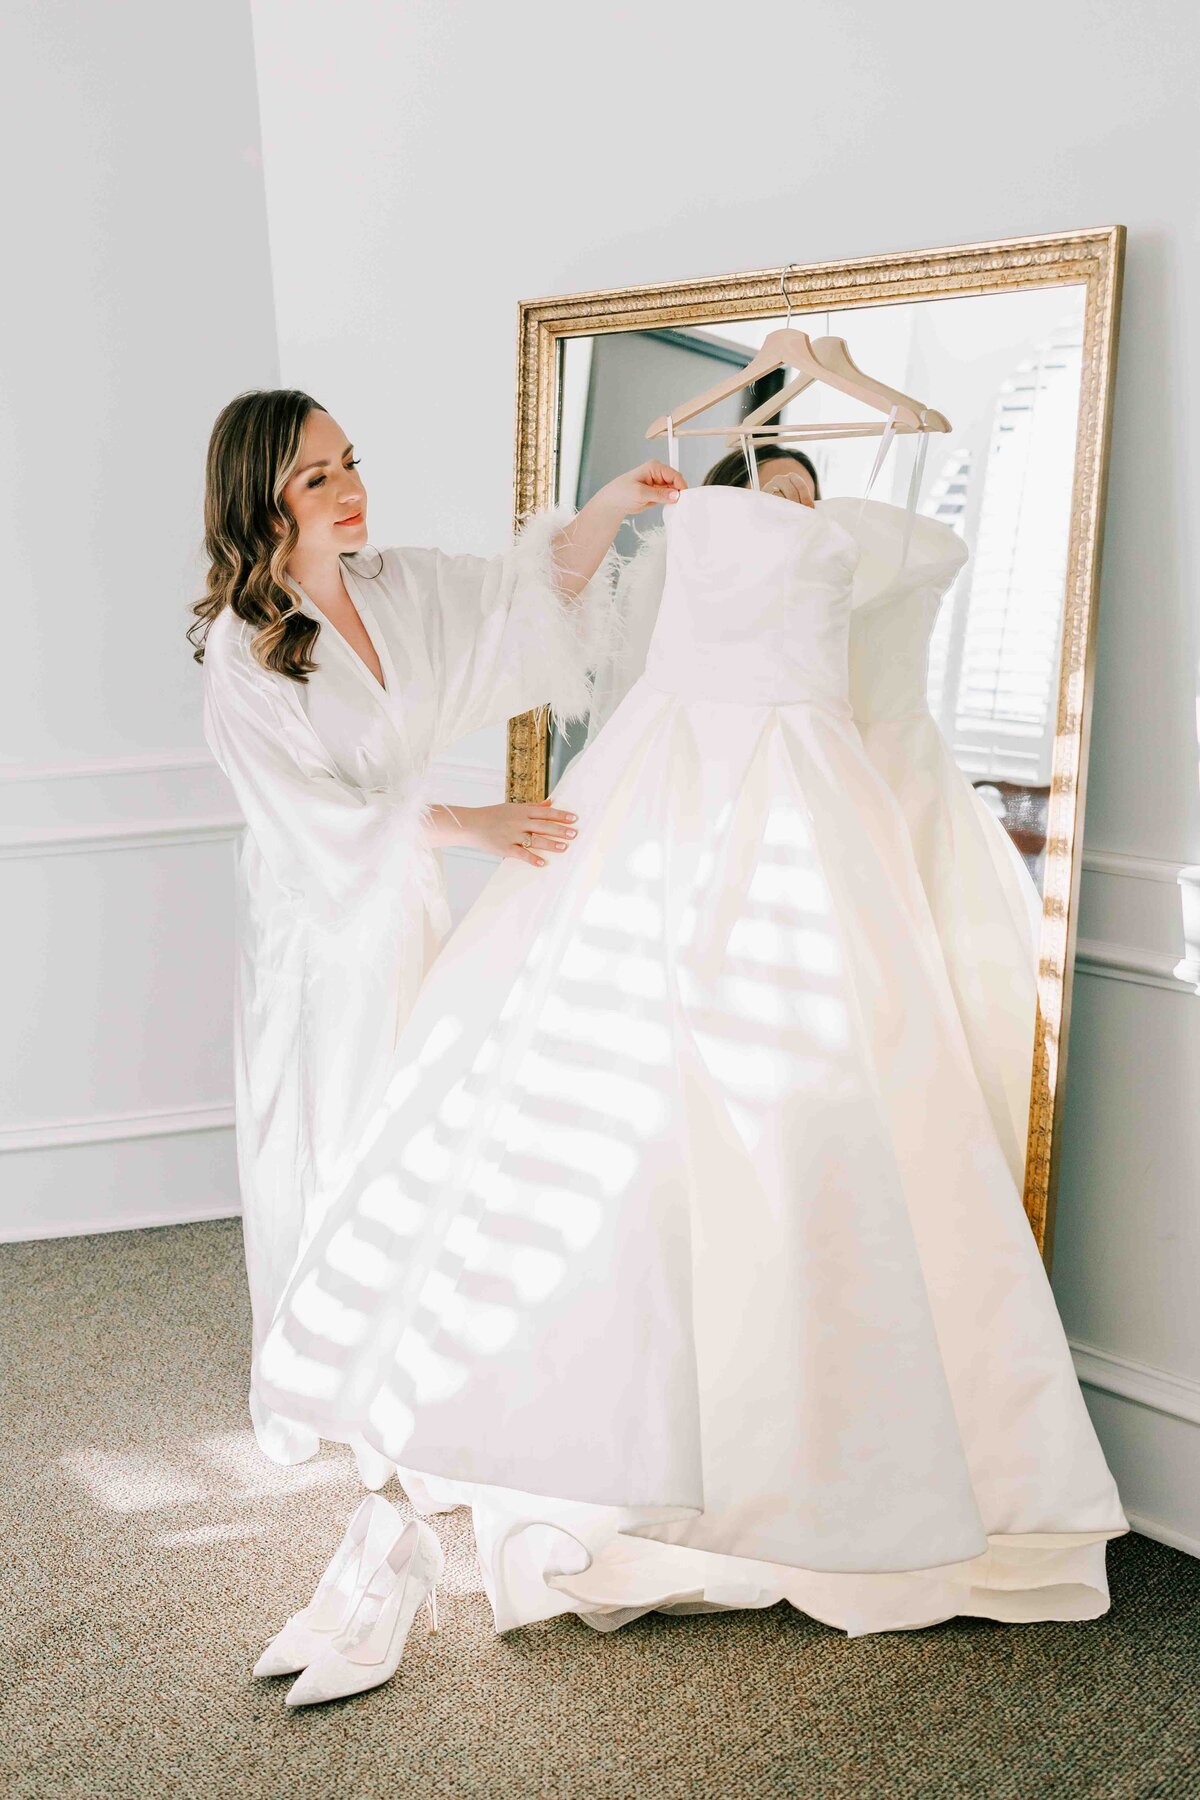 brides adores her gown on her wedding day